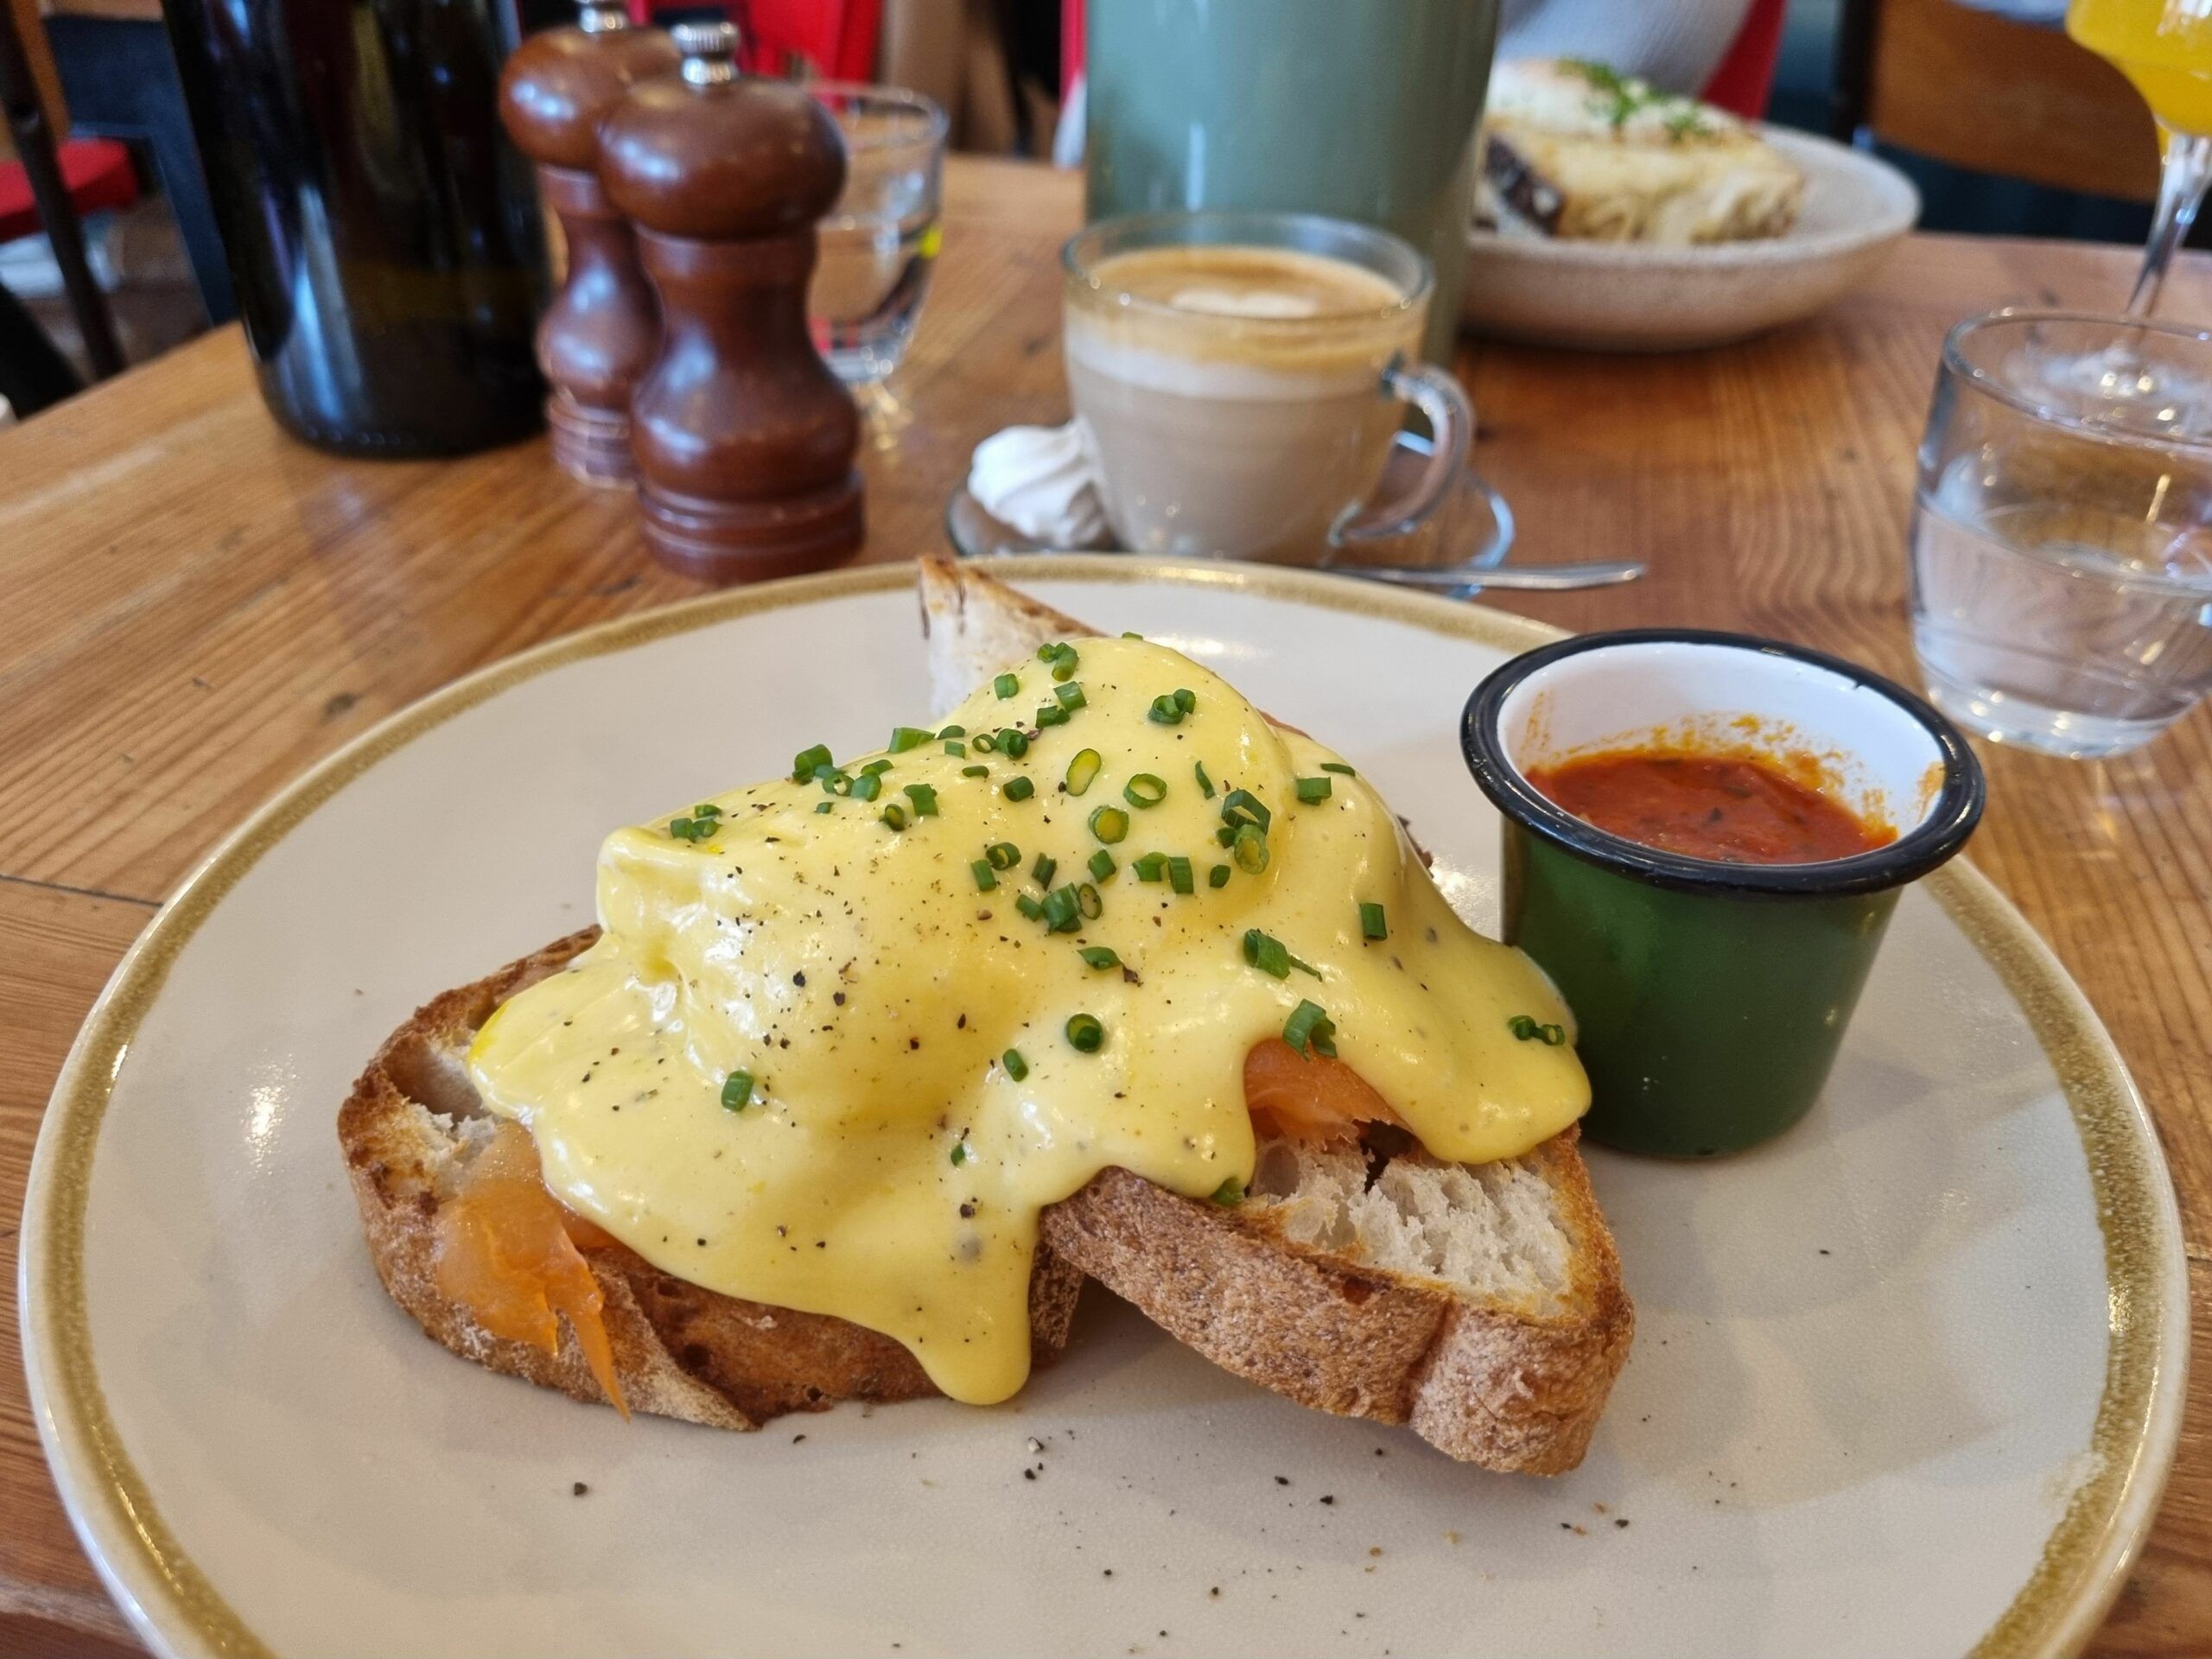 Eggs Royale served as a part of french brunch at the local Mange tout bistro